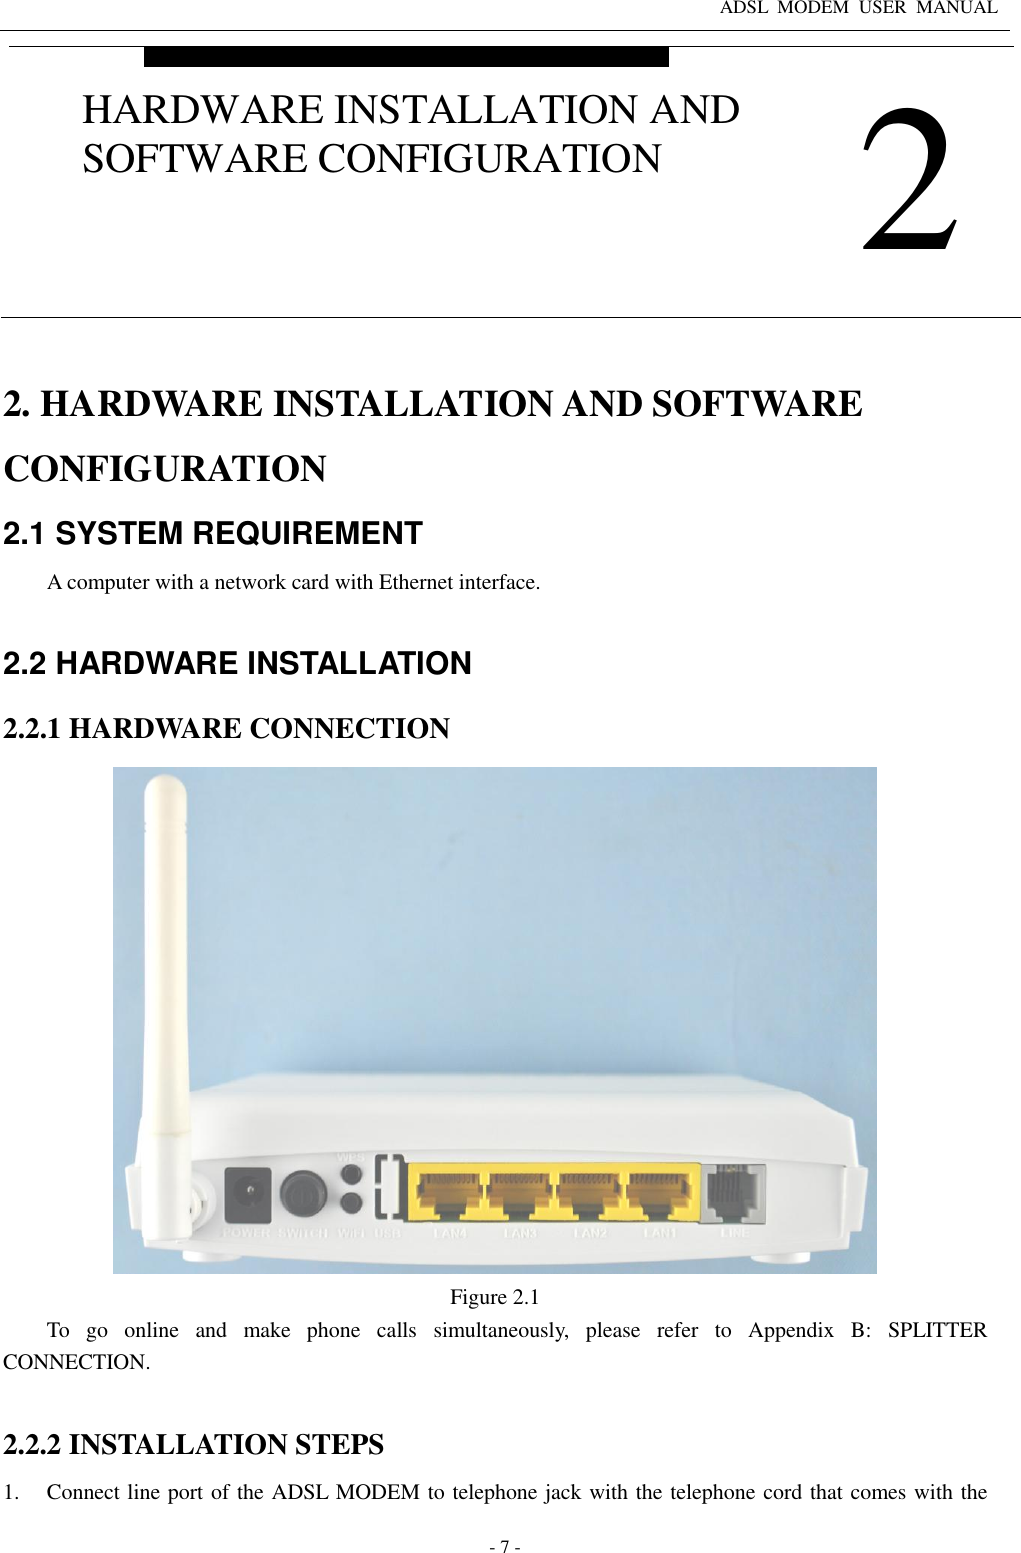 ADSL  MODEM  USER  MANUAL   - 7 - 2. HARDWARE INSTALLATION AND SOFTWARE CONFIGURATION 2.1 SYSTEM REQUIREMENT A computer with a network card with Ethernet interface.  2.2 HARDWARE INSTALLATION 2.2.1 HARDWARE CONNECTION  Figure 2.1 To  go  online  and  make  phone  calls  simultaneously,  please  refer  to  Appendix  B:  SPLITTER CONNECTION.  2.2.2 INSTALLATION STEPS 1. Connect line port of the ADSL MODEM to telephone jack with the telephone cord that comes with the  2 HARDWARE INSTALLATION AND SOFTWARE CONFIGURATION 